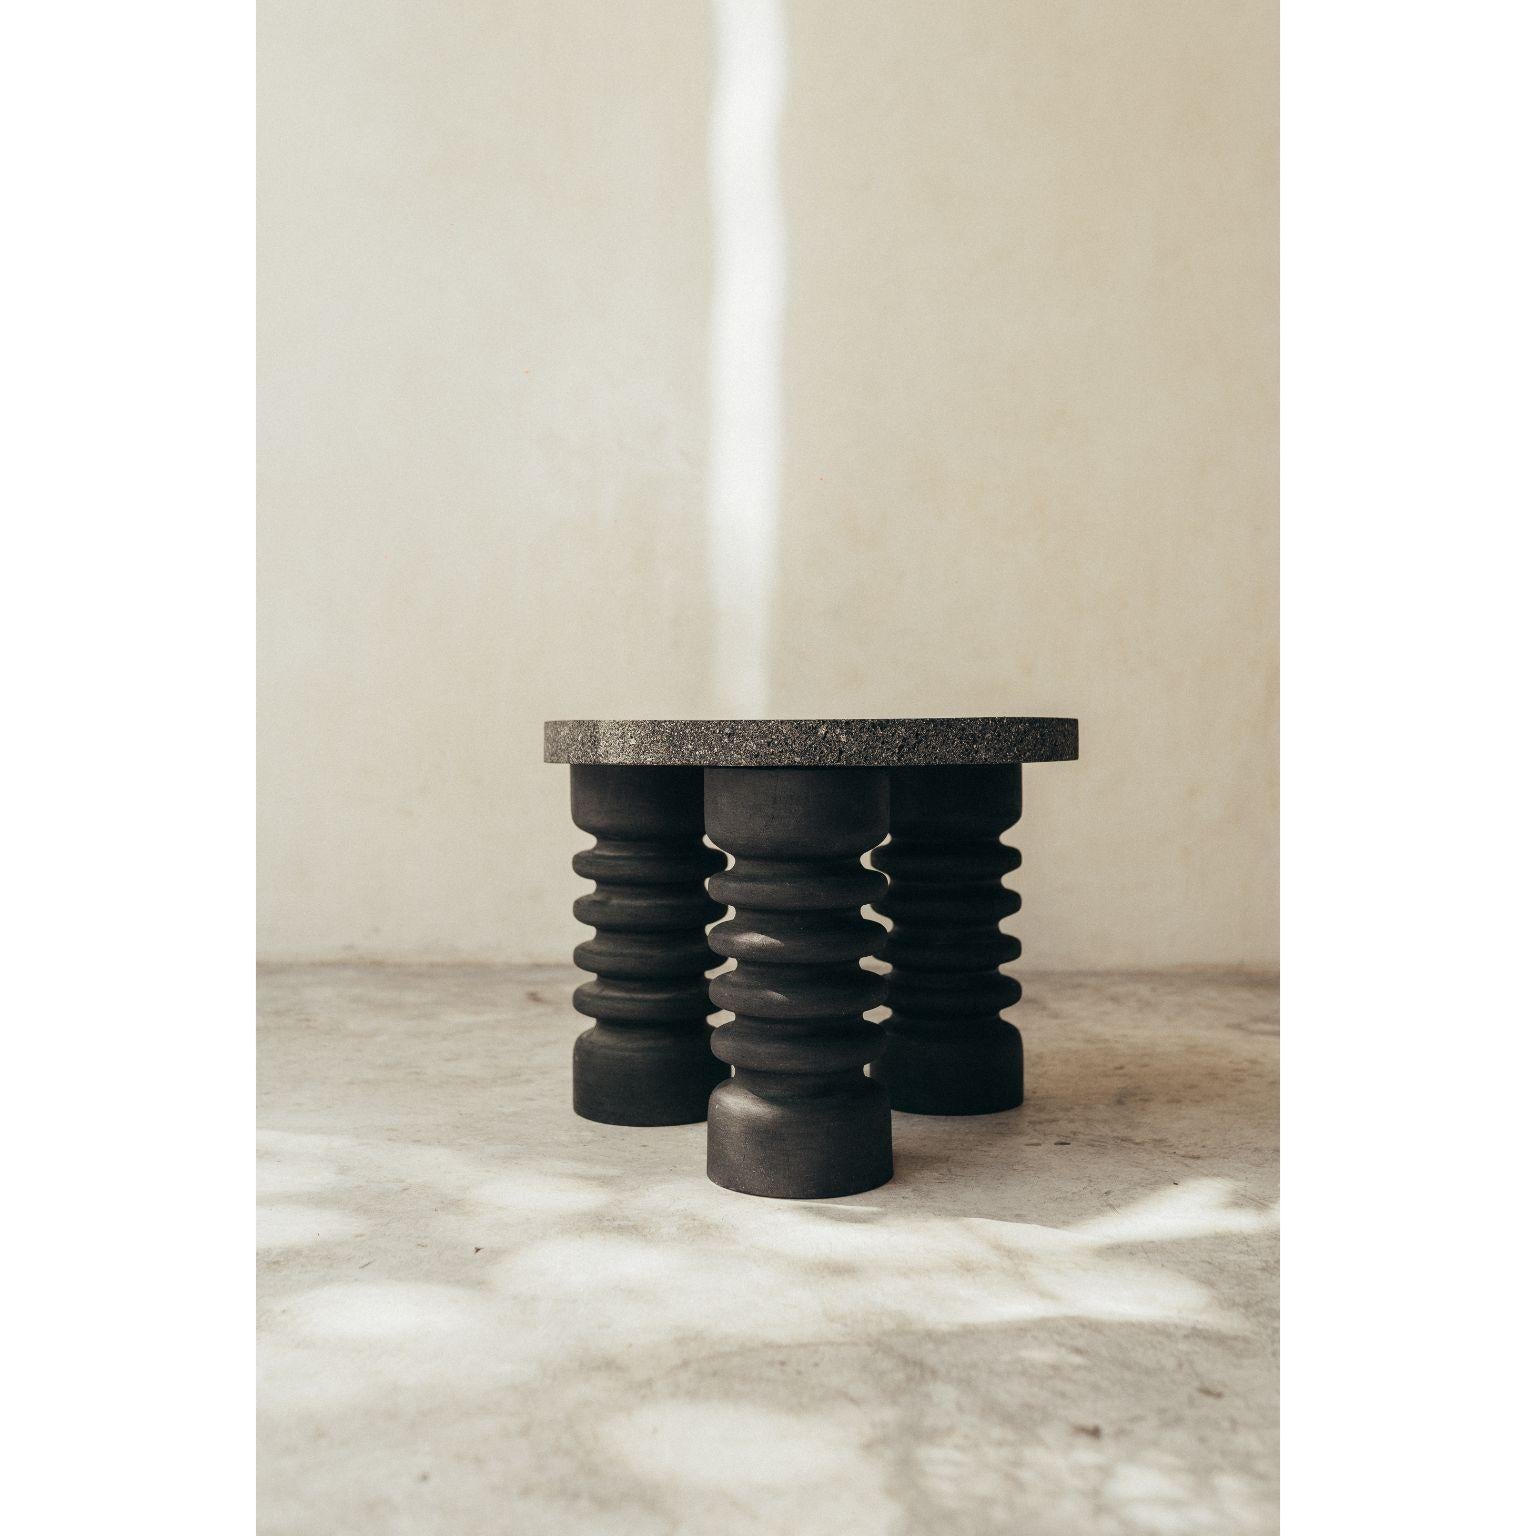 Volcanic stone and burnt wood table by Daniel Orozco
Dimensions: D 45 x H 34 cm
Materials: Wood, Volcanic Stone

Daniel Orozco Estudio
We are an inclusive interior design estudio, who love to work with fabrics and natural textiles in makes our